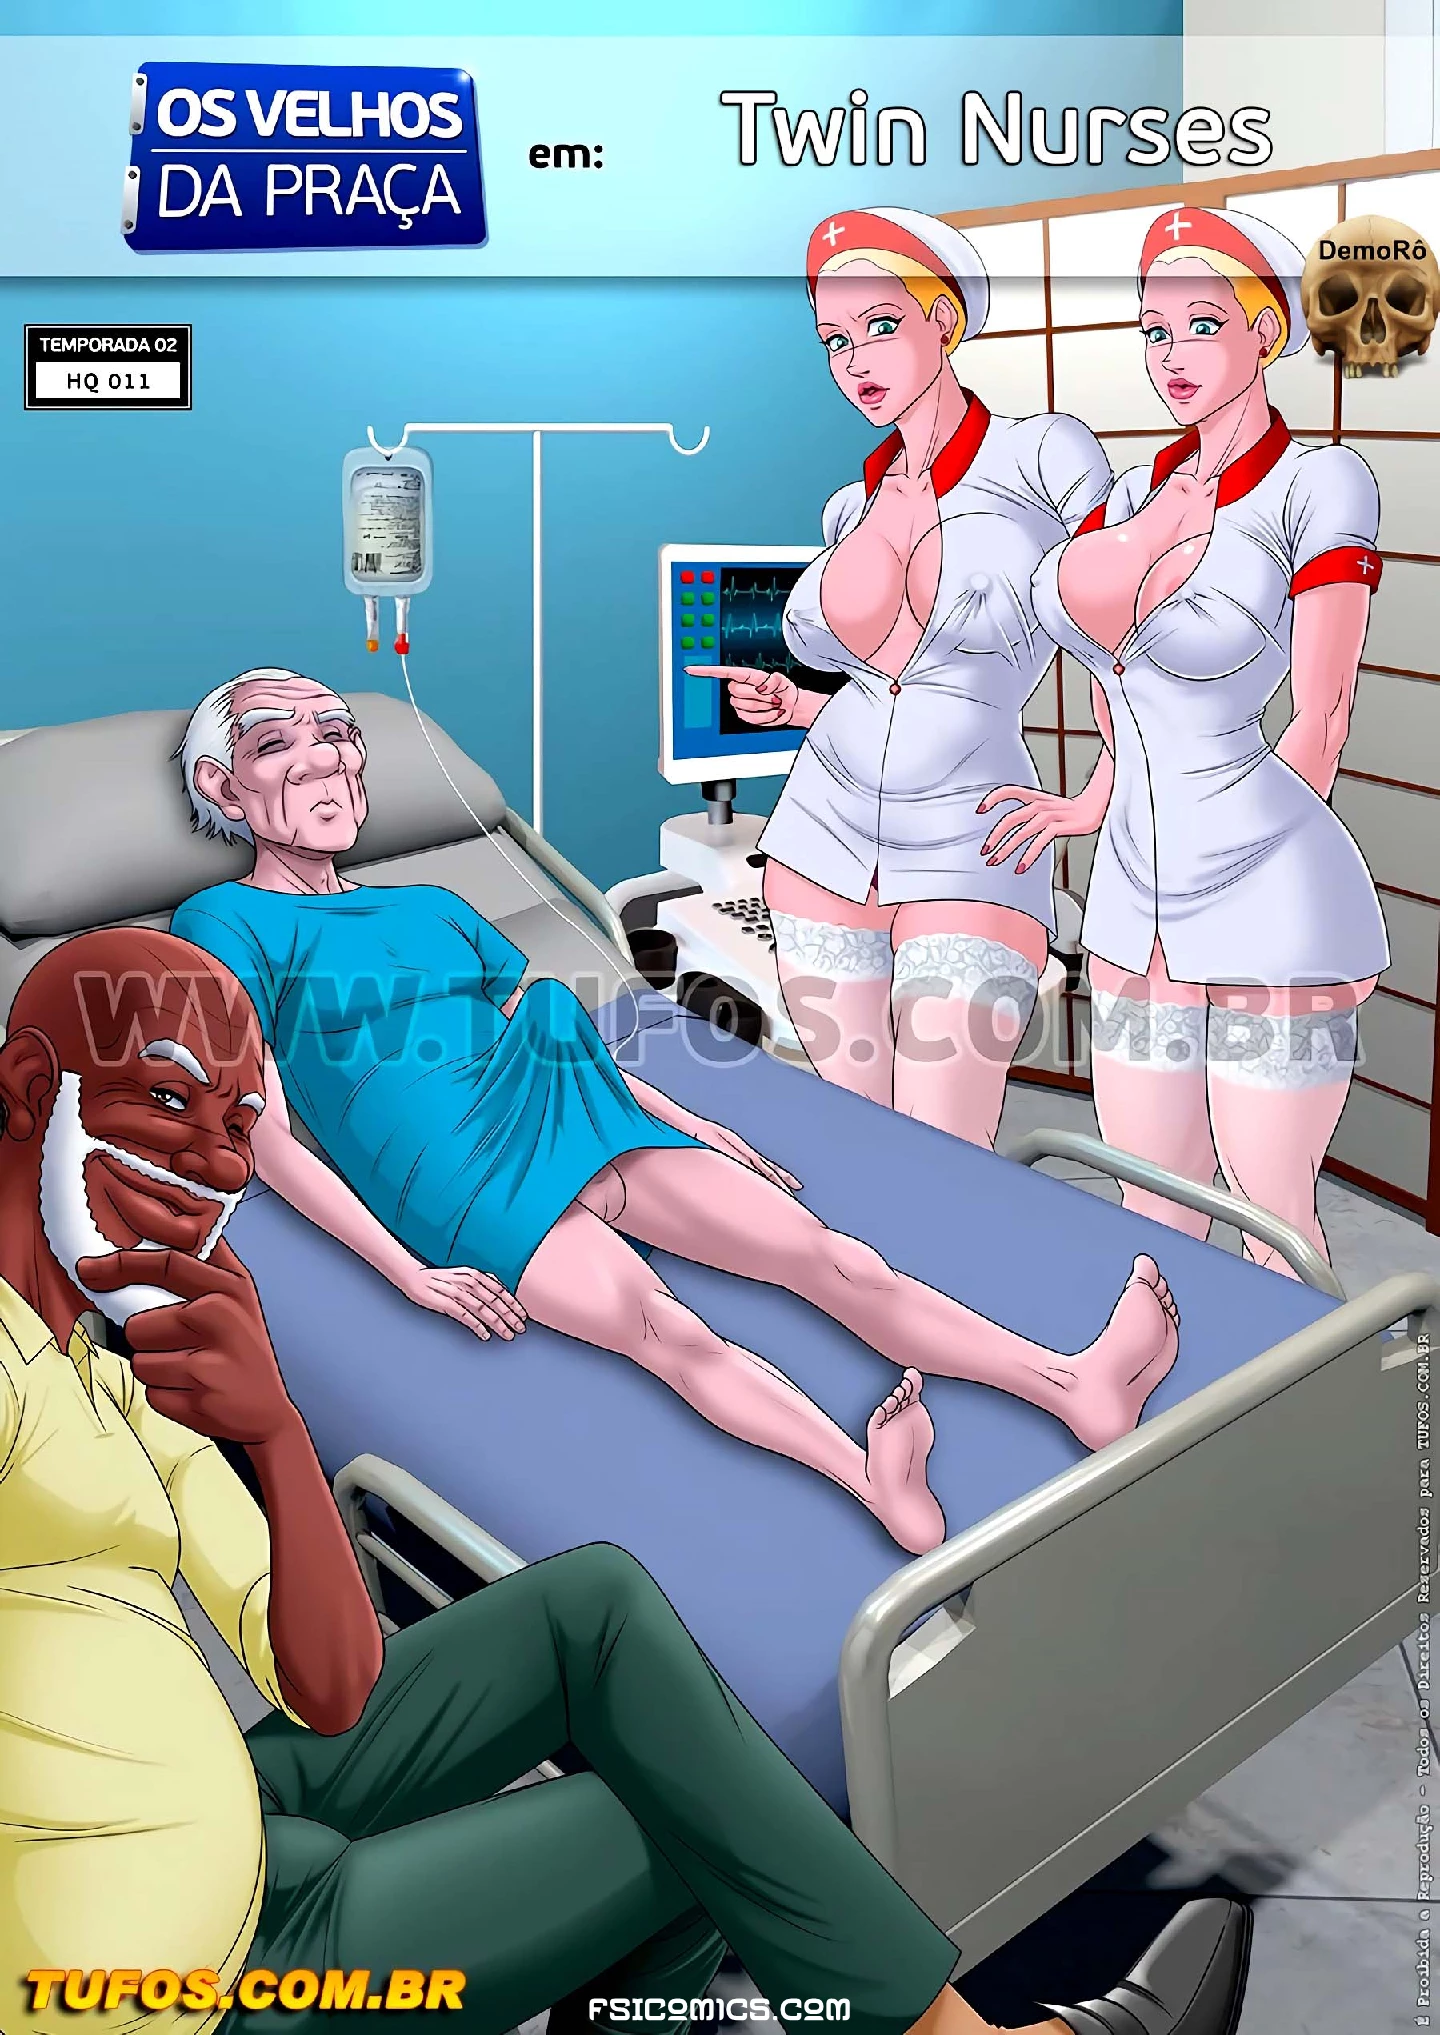 Old Geezers Of The Park Chapter 11 – Twin Nurses – Wc Tf - 65 - Fsicomics